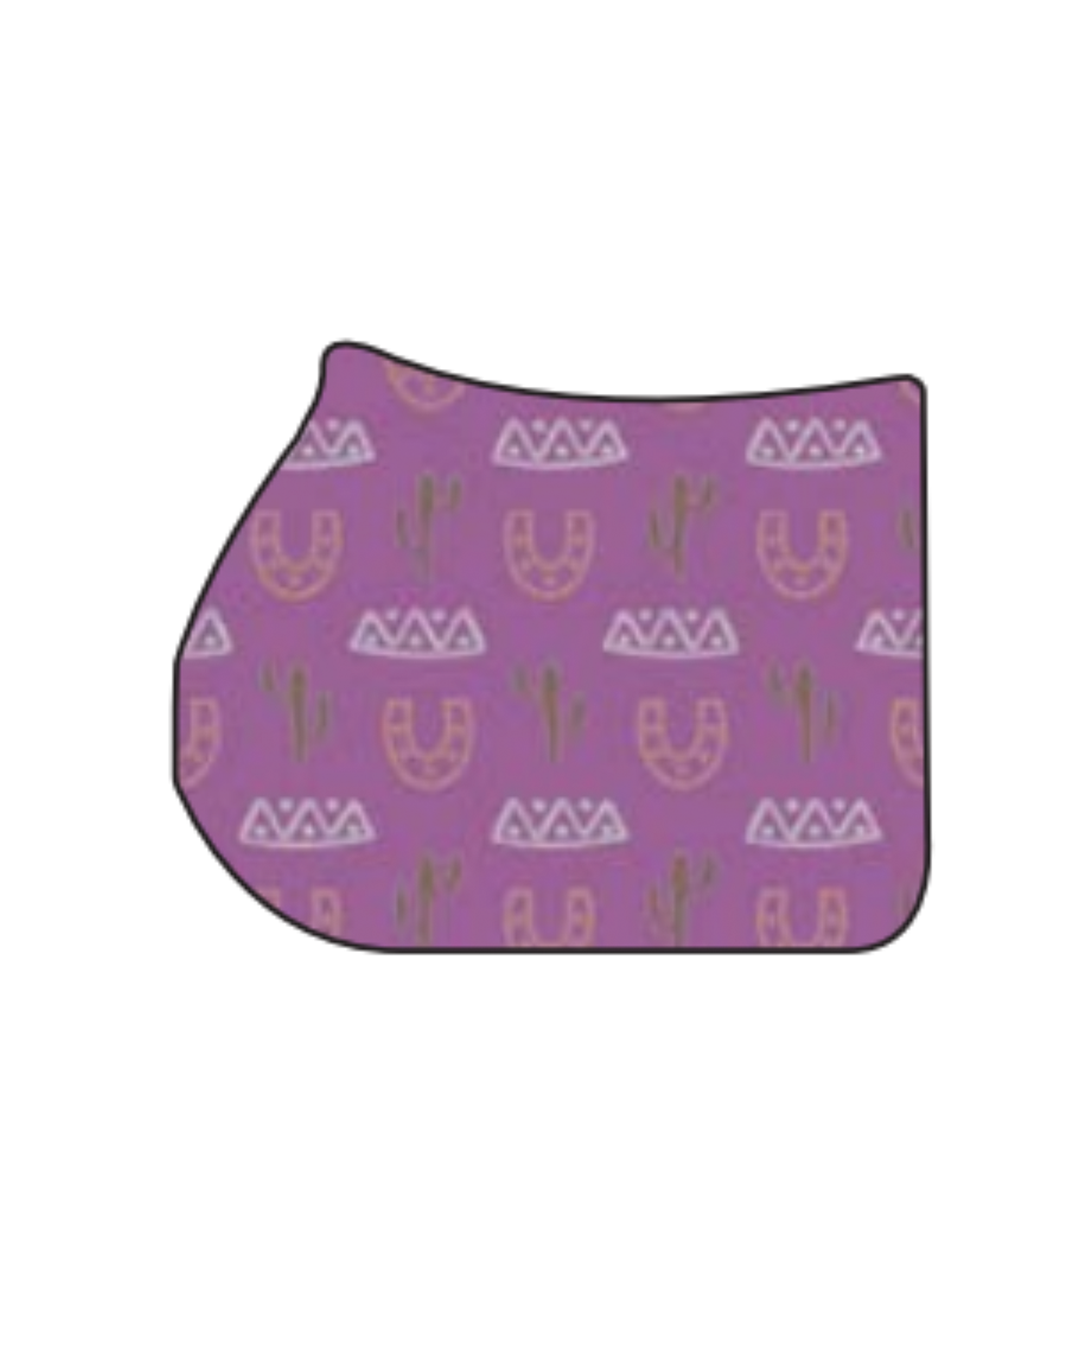 Copy of Dreamer's & Schemer's Dressage Saddle Pad Saddle Pad Dreamers and Schemers - Equestrian Fashion Outfitters